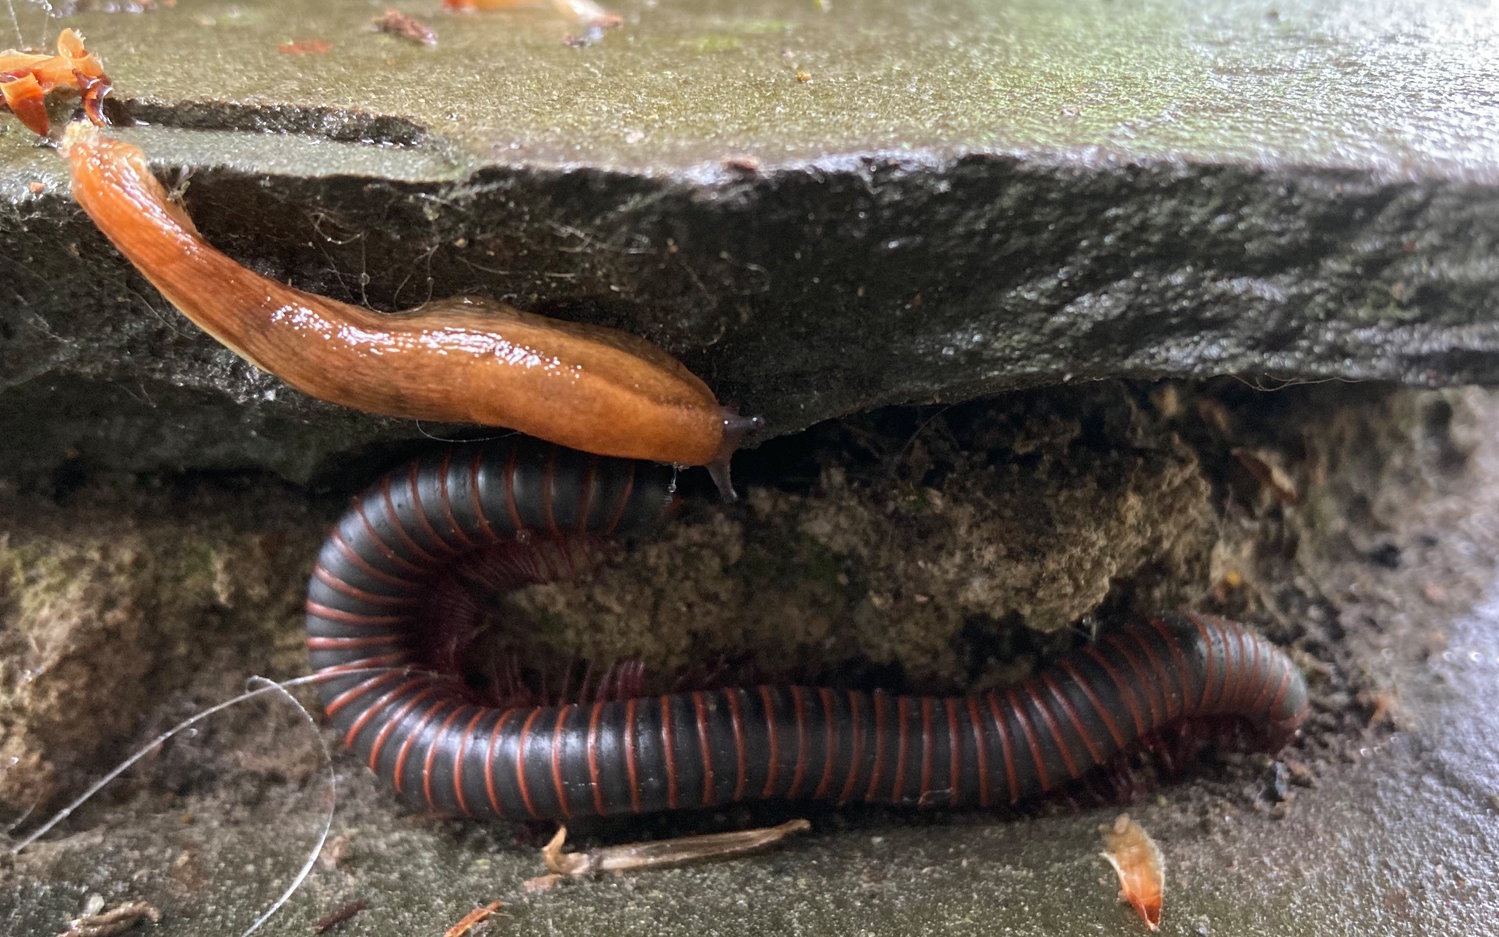 A slug spies on a snoozing millipede before moving on to more interesting endeavors.